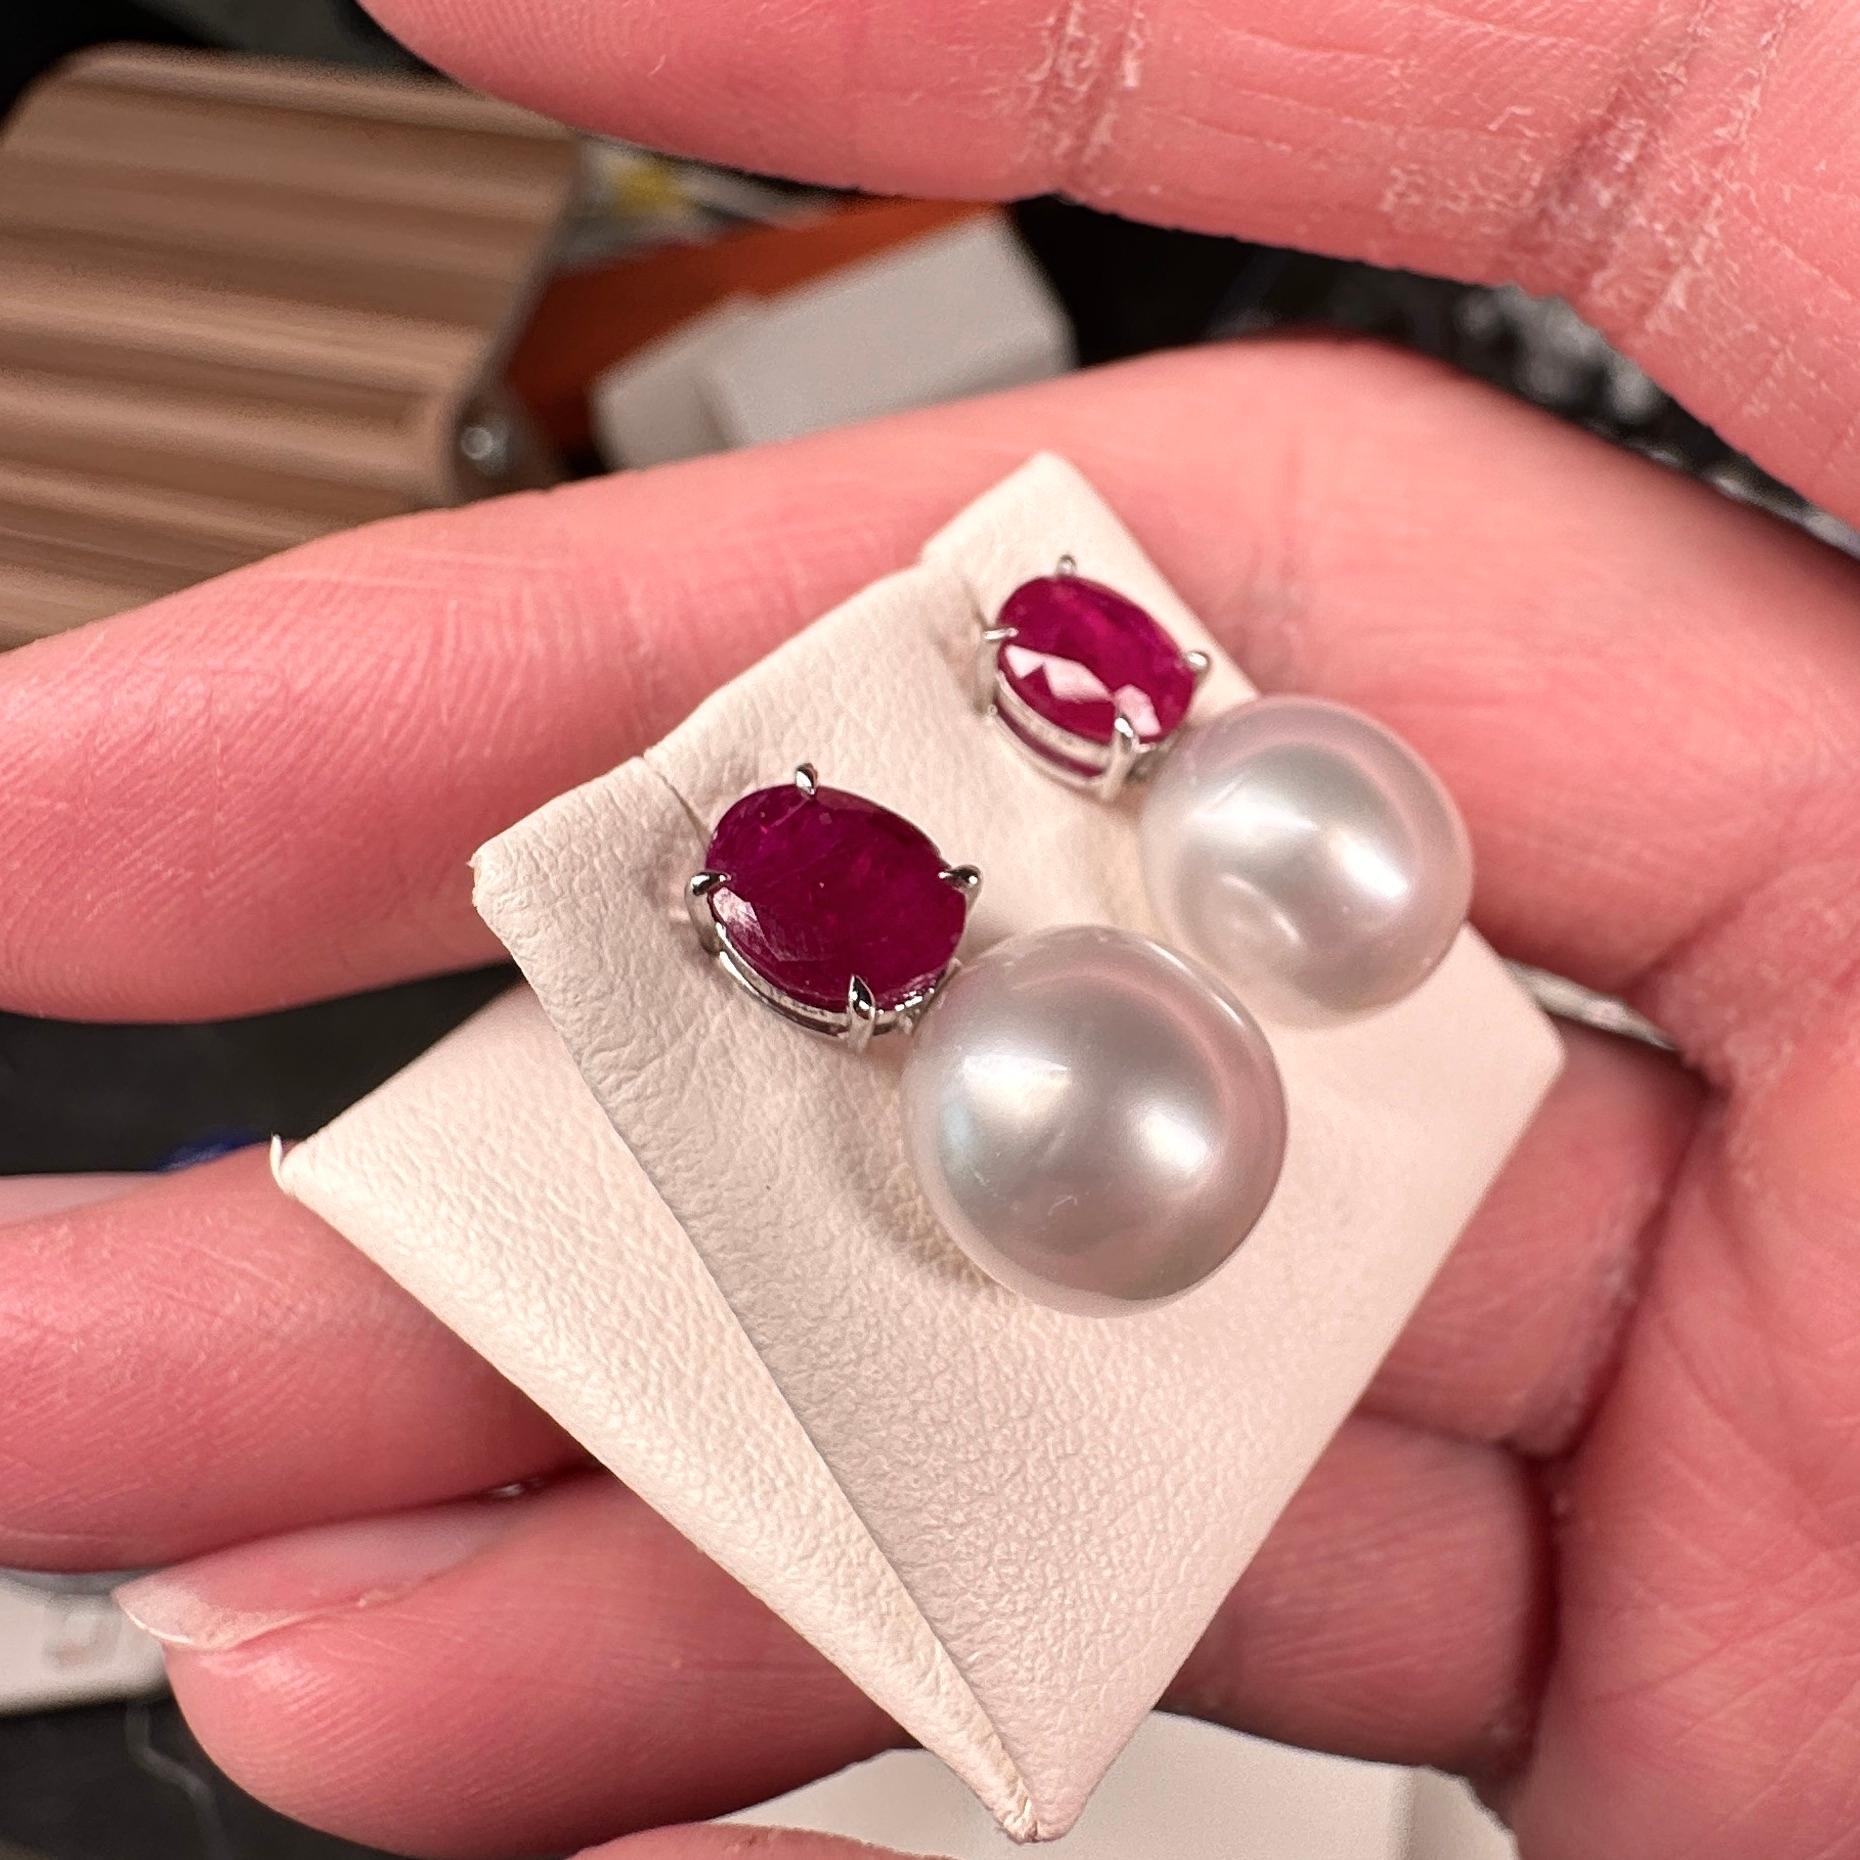 A pair of 9.5 mm oval south sea pearl, ruby  earrings in 18k white gold. This earrings is consist of an oval south sea pearl hanging below the ruby ear stud  It is a very classical design and is perfect for any occasions. The south sea pearls are